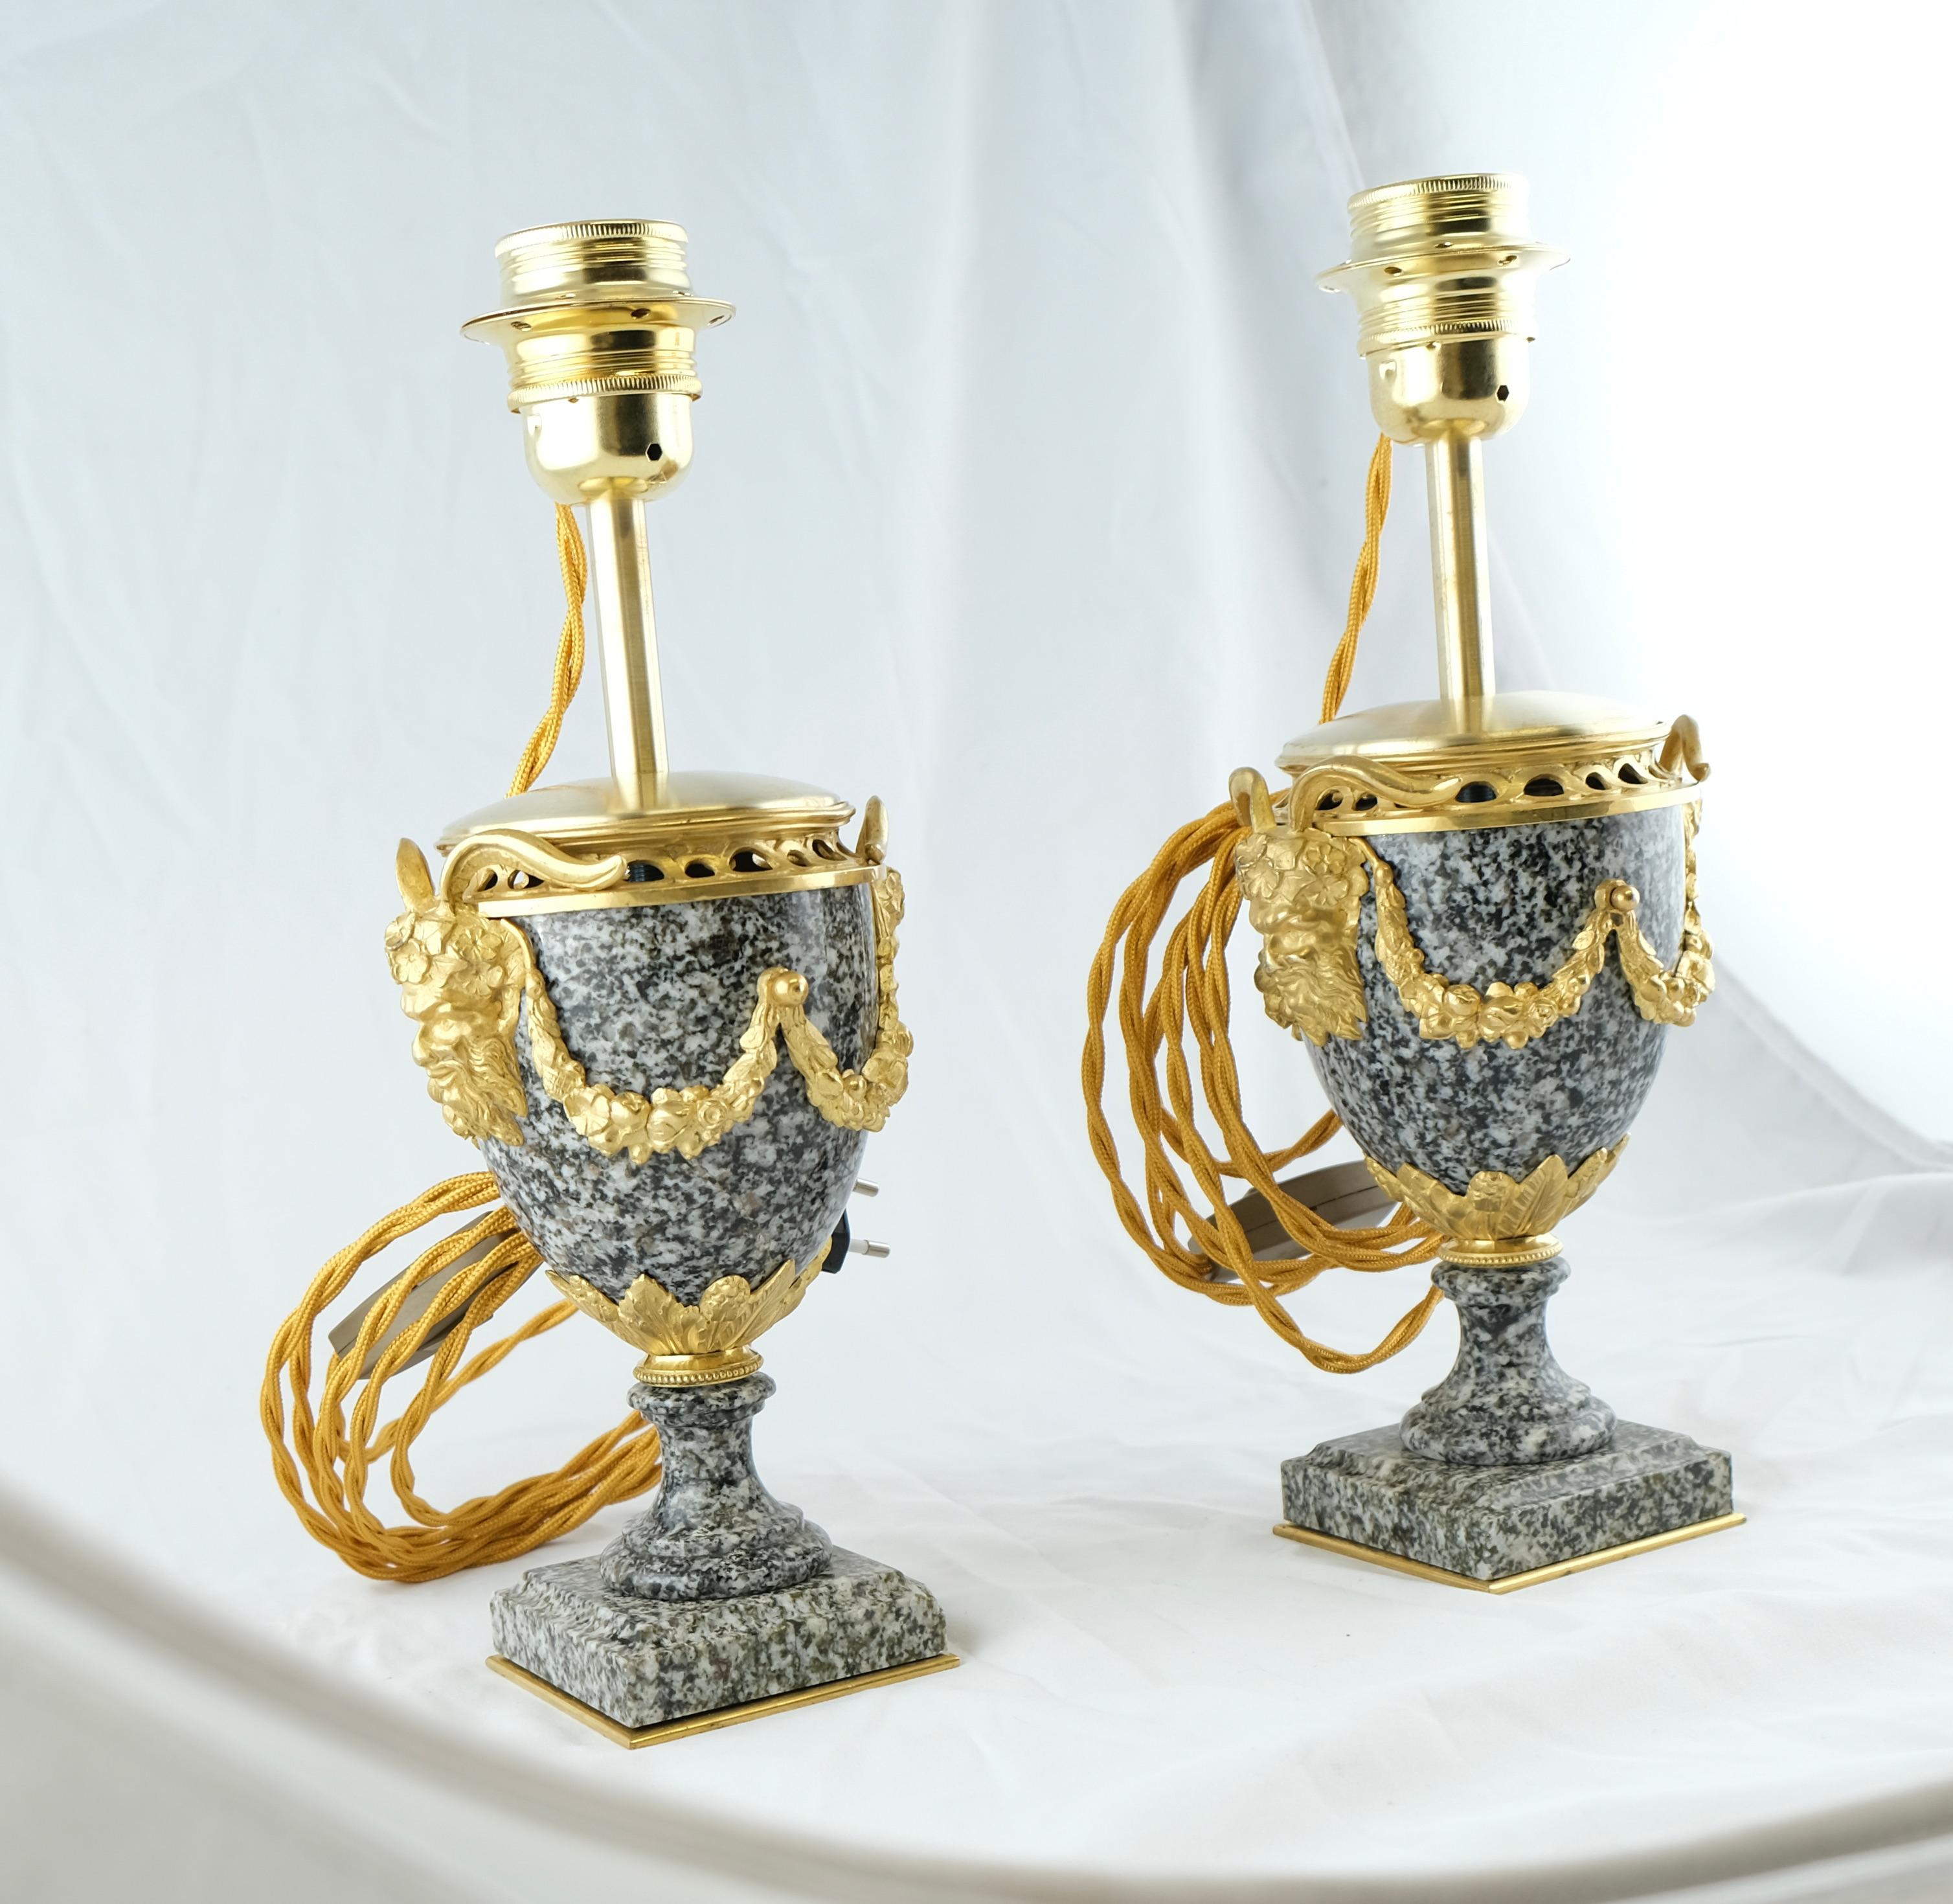 Louis XVI Pair of Antique Bronze Mounted Granite Urns Mounted as Lamps, Louix Xvl Style For Sale